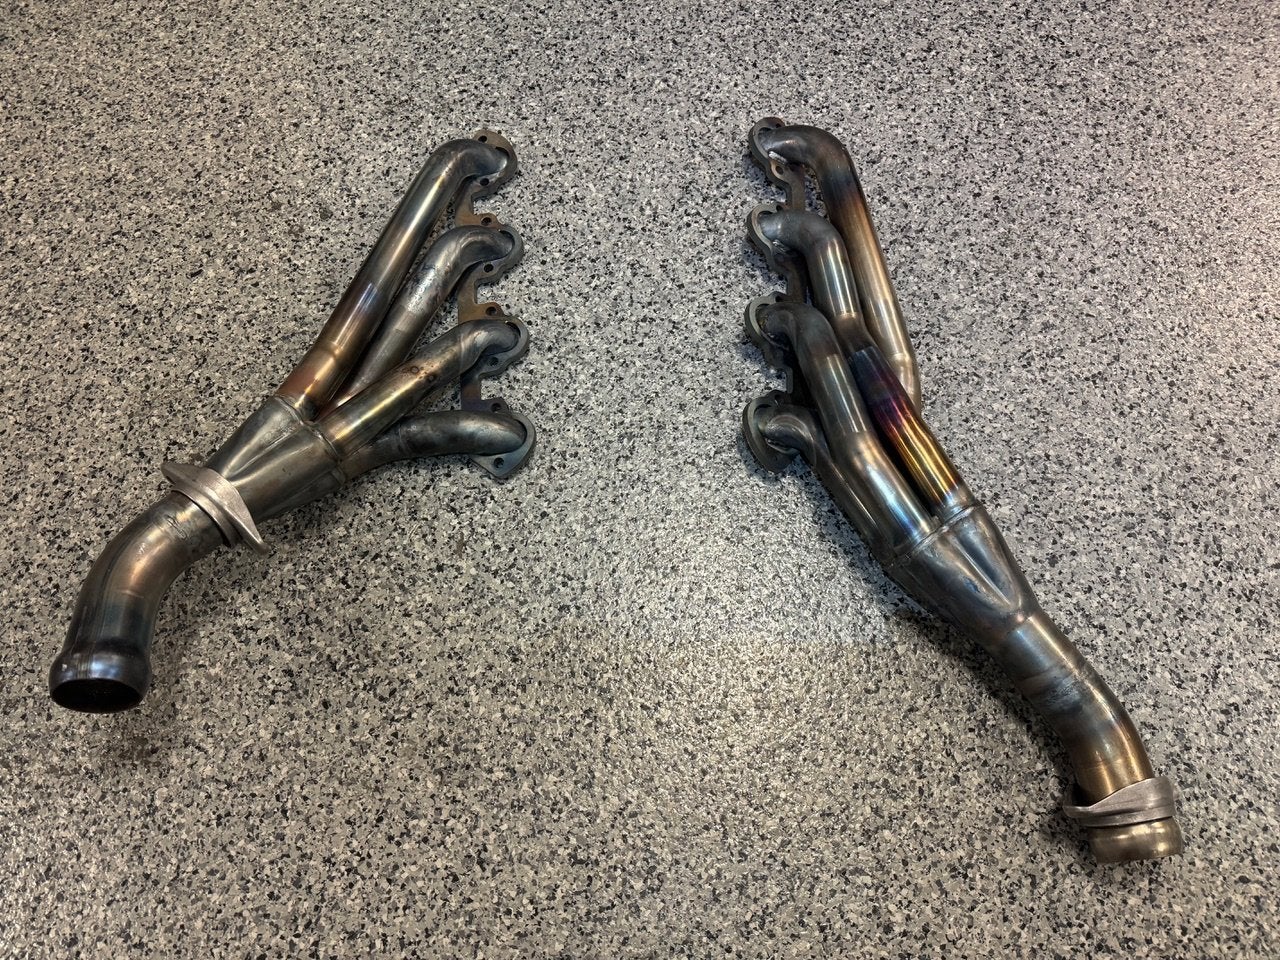 FOR SALE - BRAND NEW shorty headers by FPA for 460 in 1971 Mustang